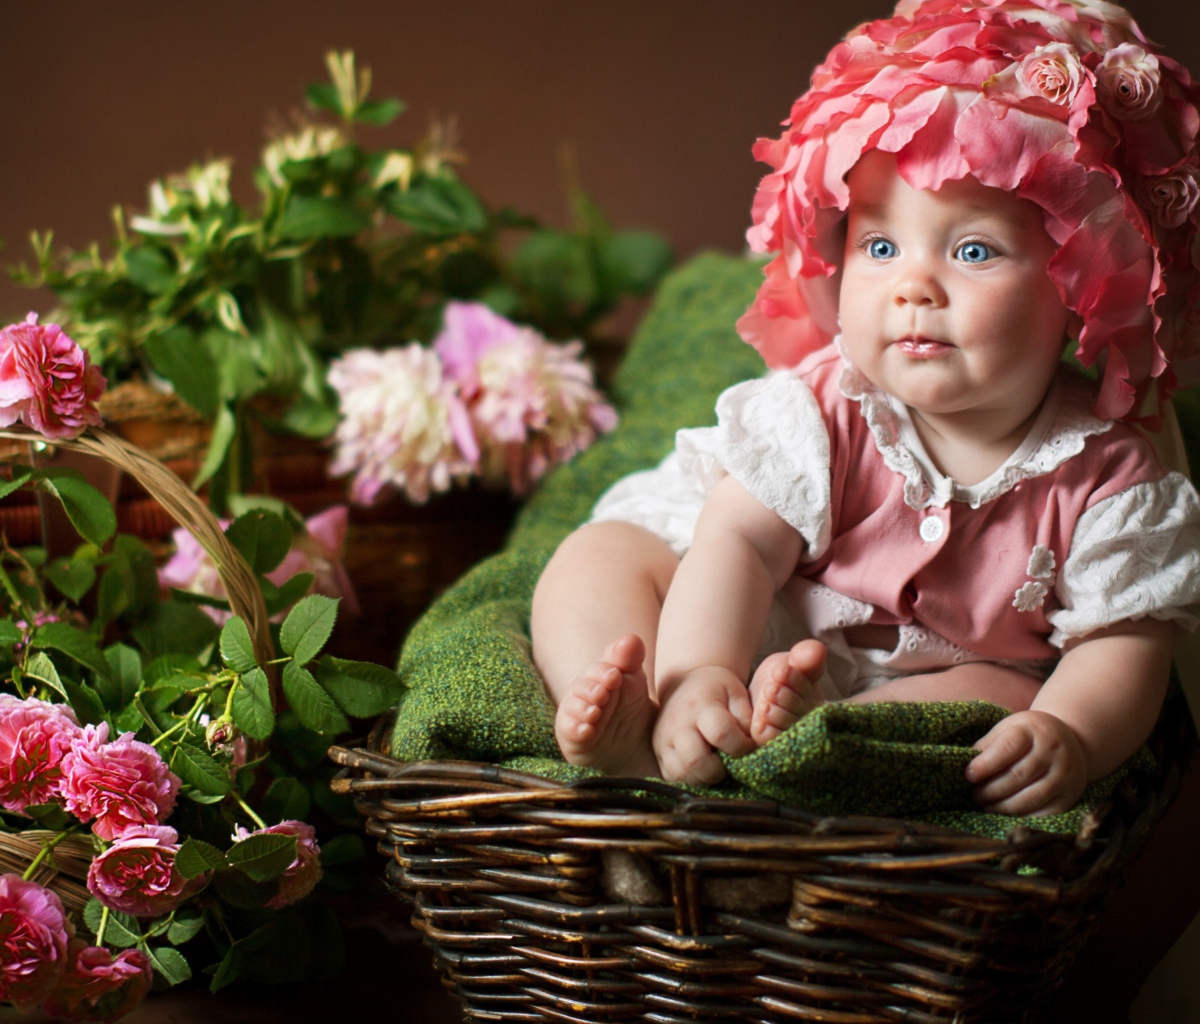 Cute Baby With Blue Eyes And Roses wallpaper 1200x1024